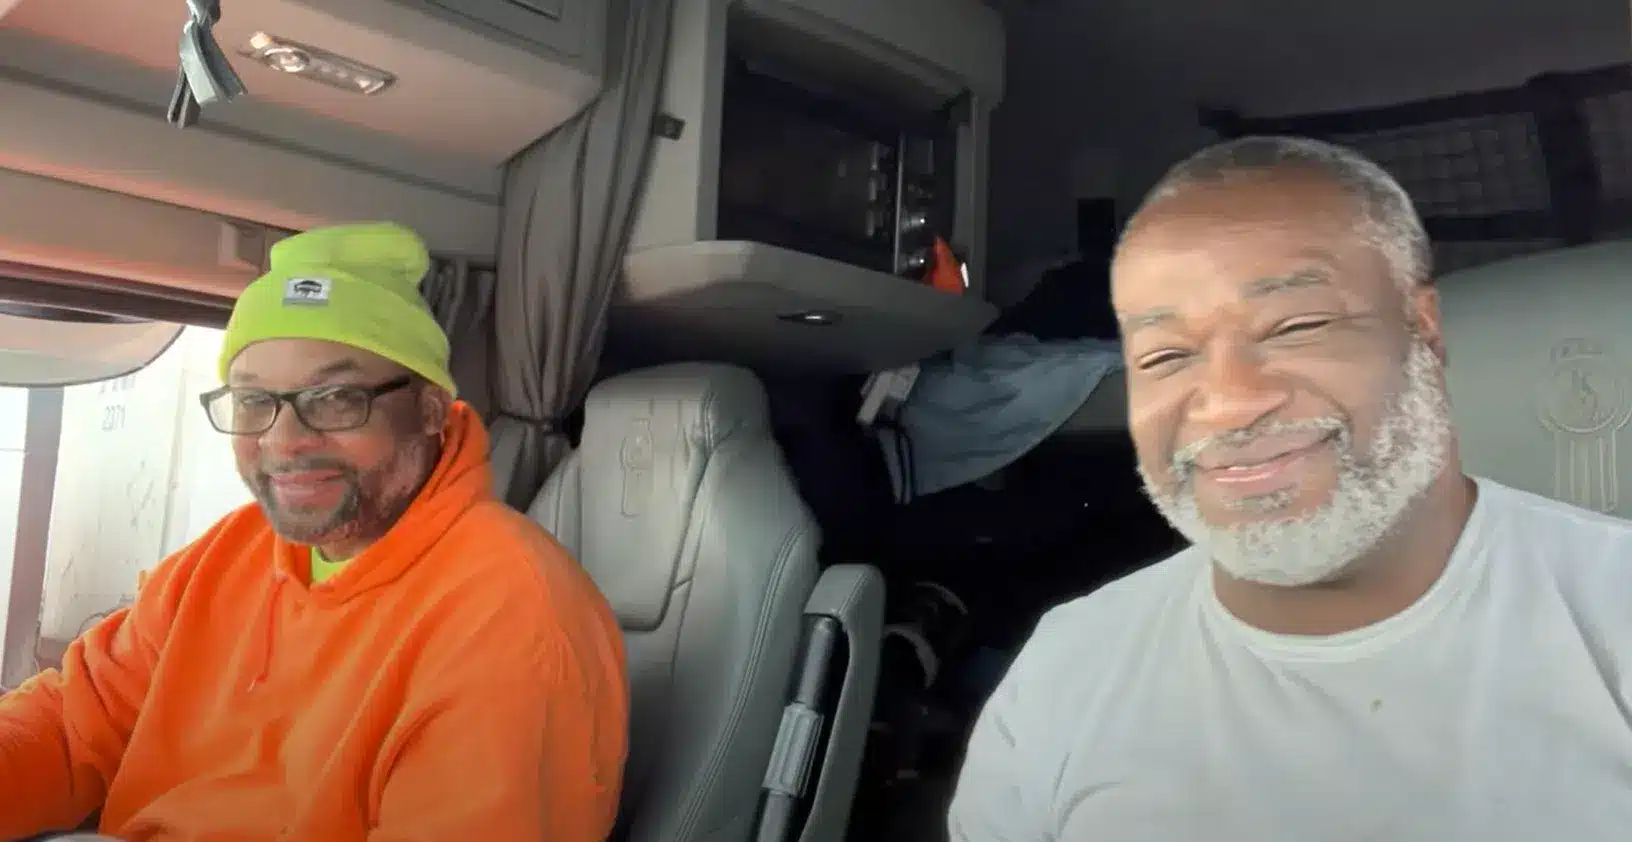 Melton social media influencer sitting next to a trainee in his truck